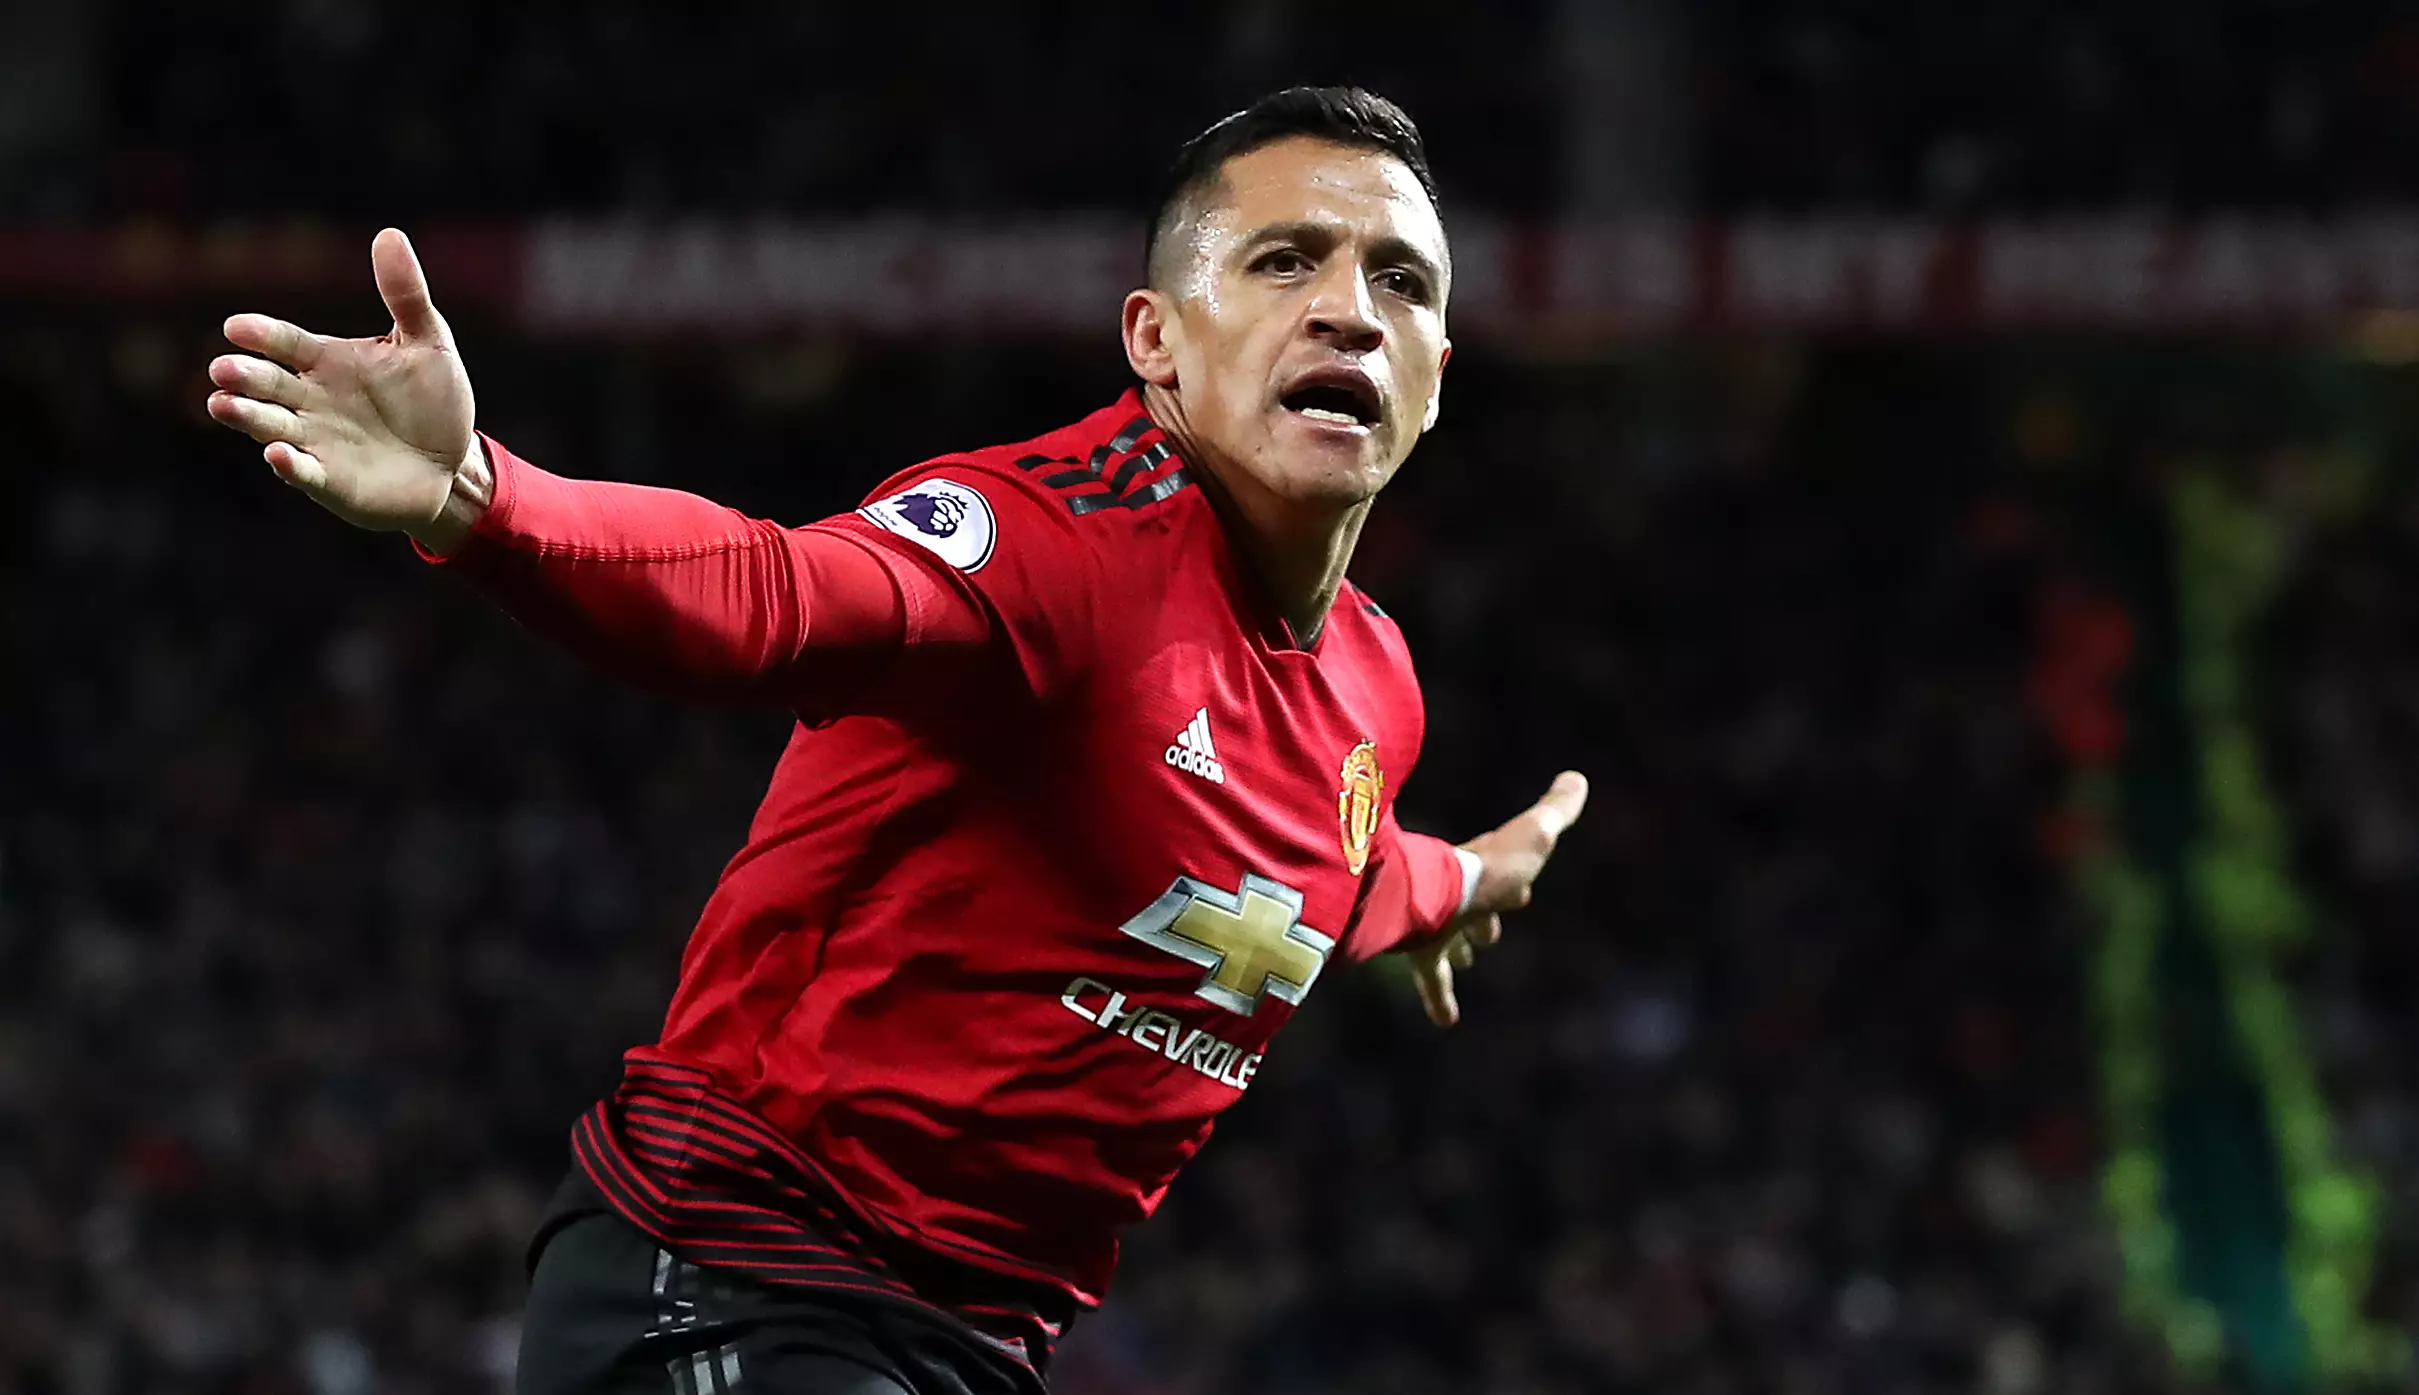 Sanchez came off the bench to score the winner. Image: PA Images